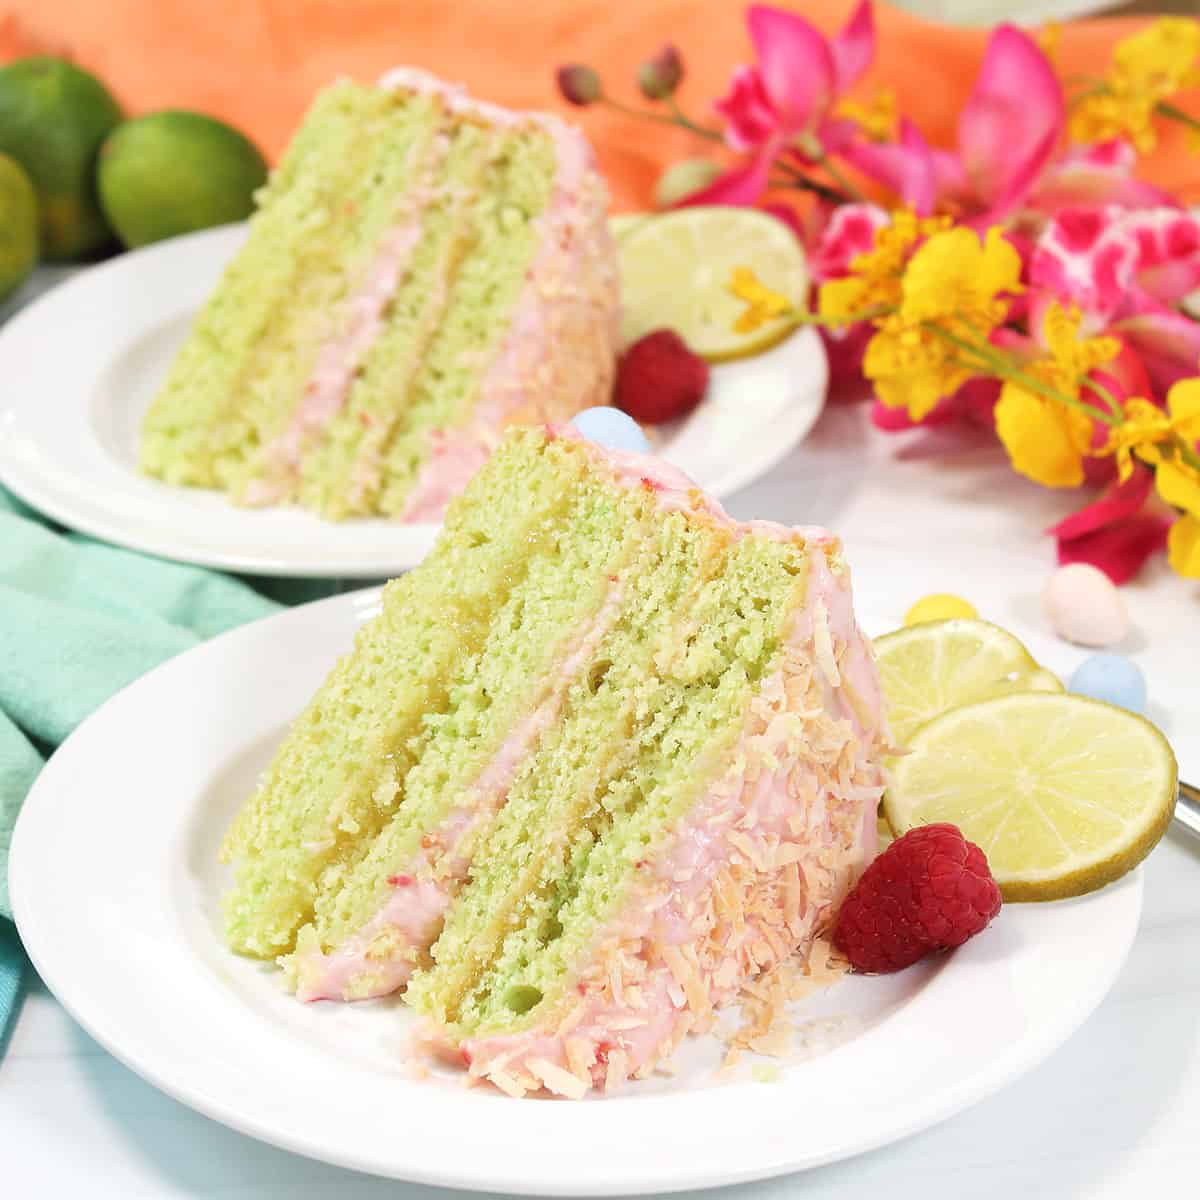 Two slices of green lime cake.